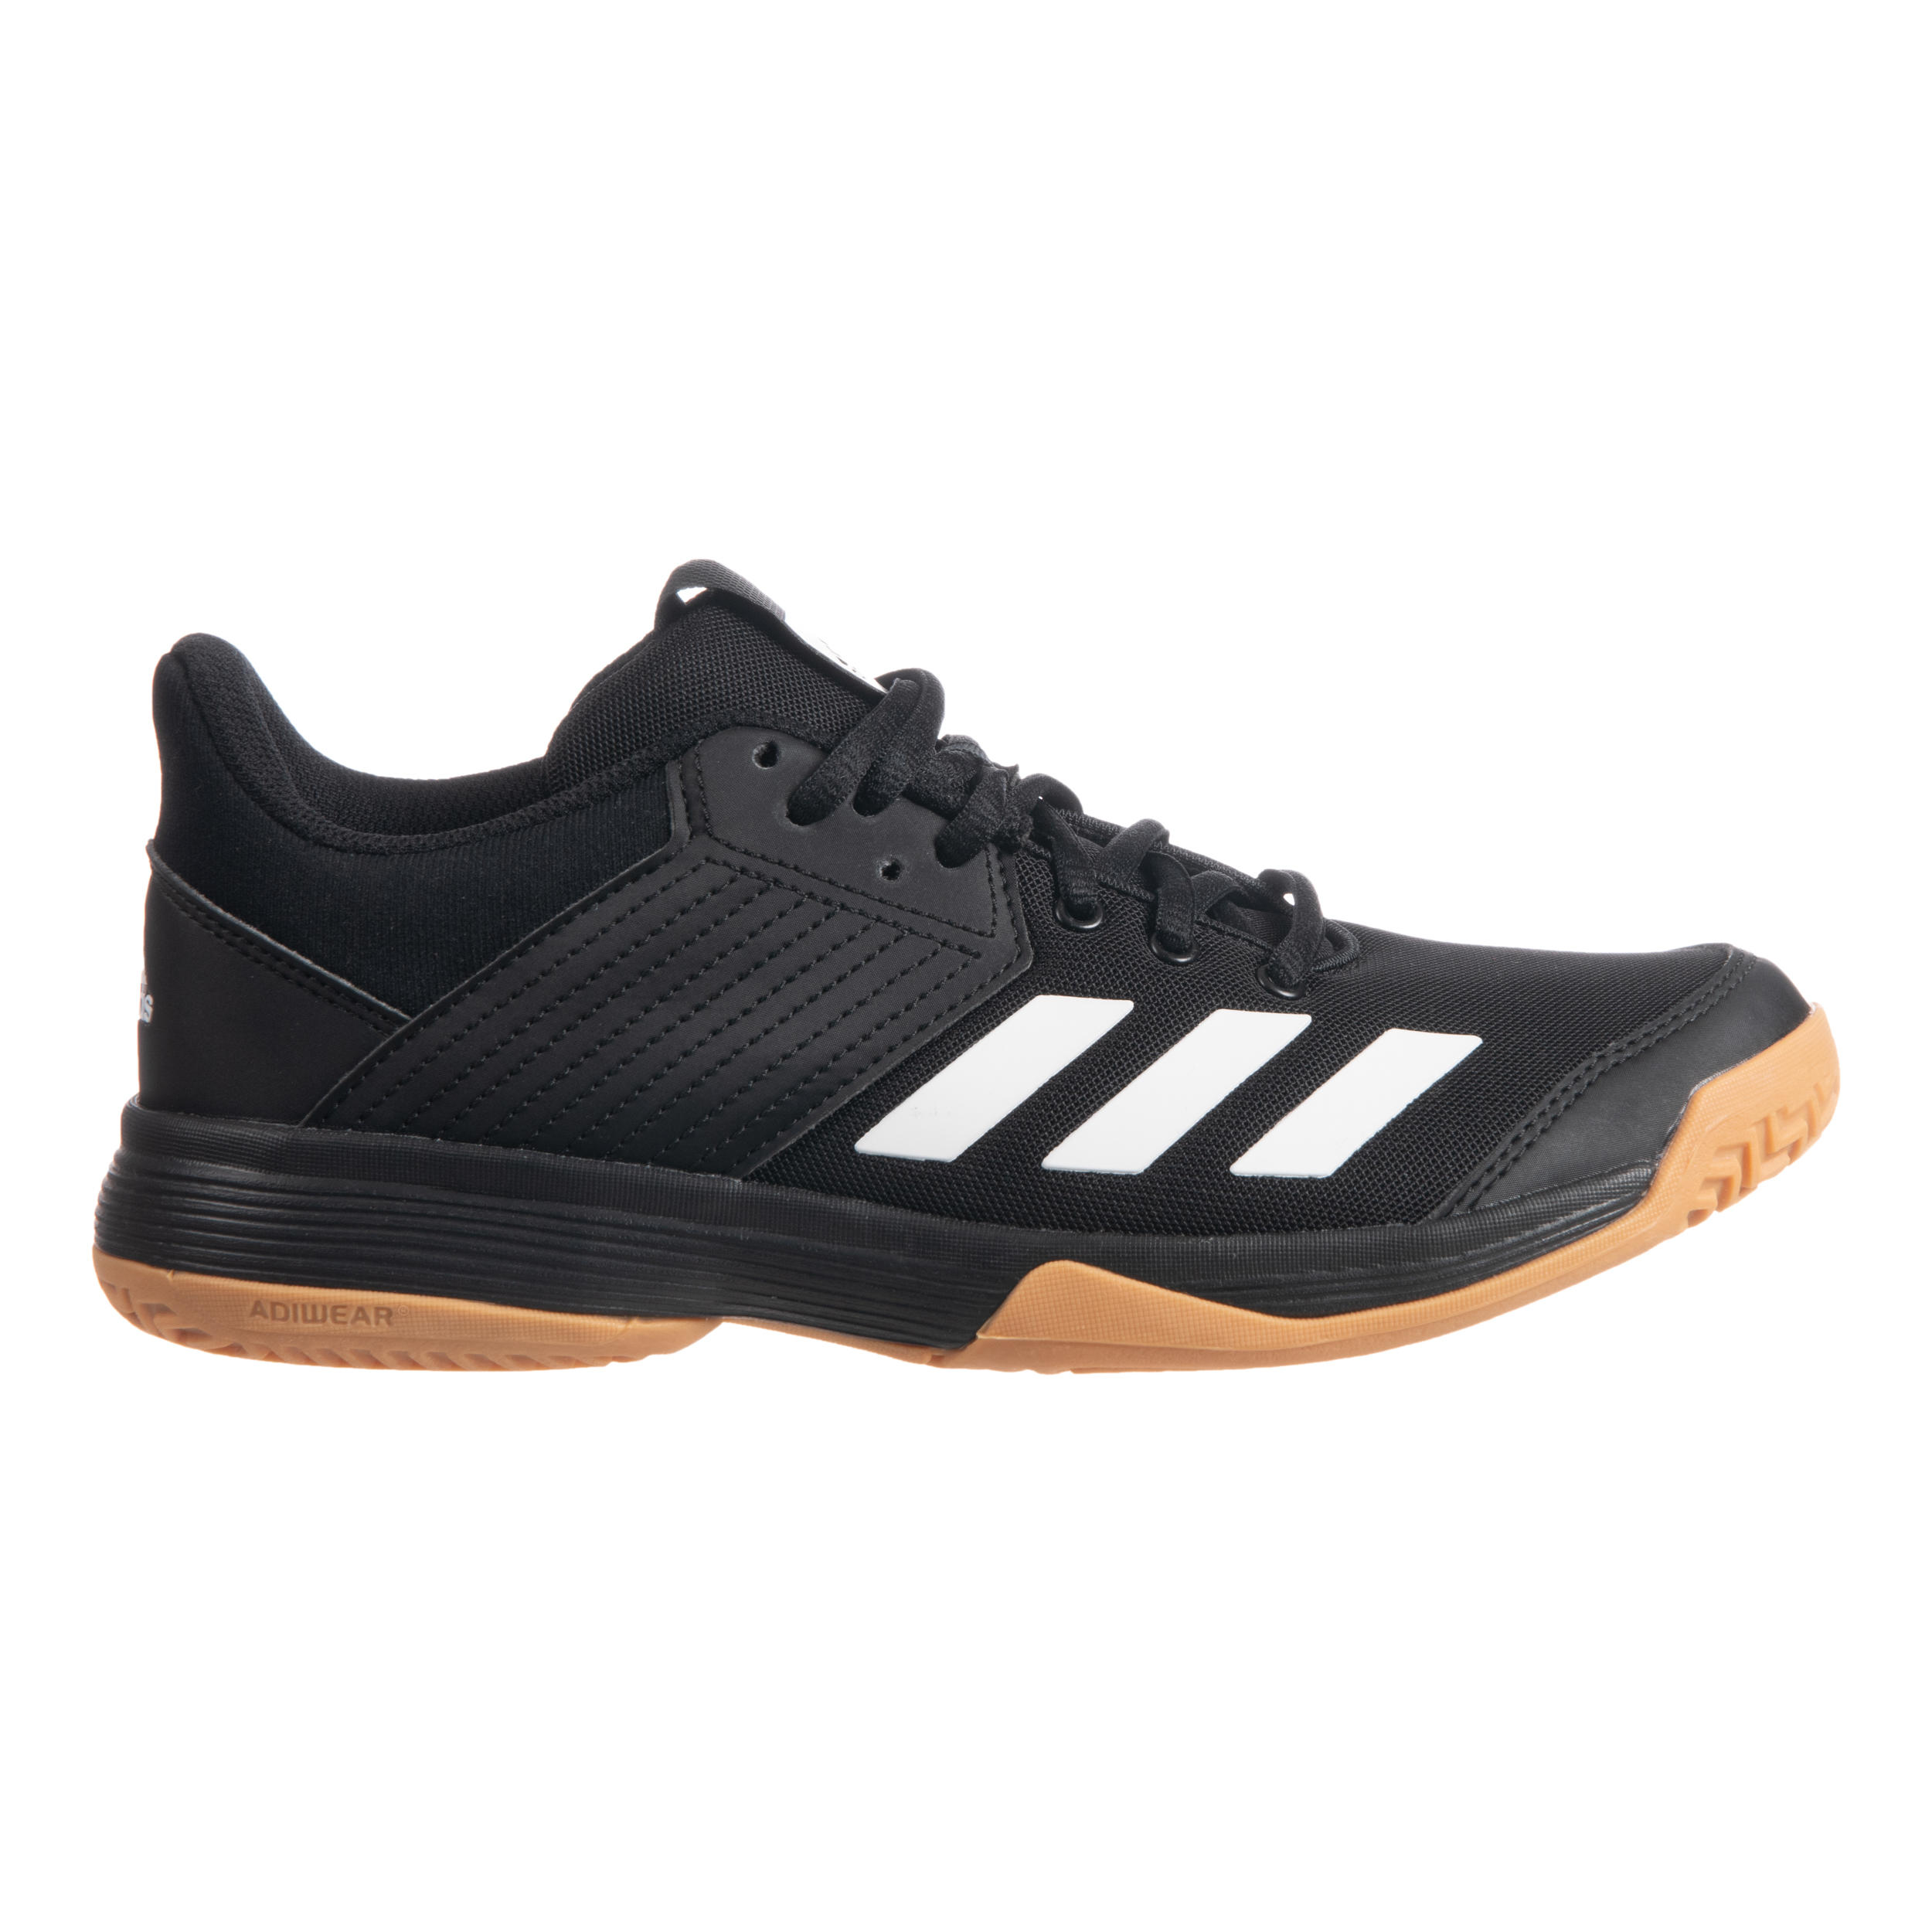 adidas table tennis shoes